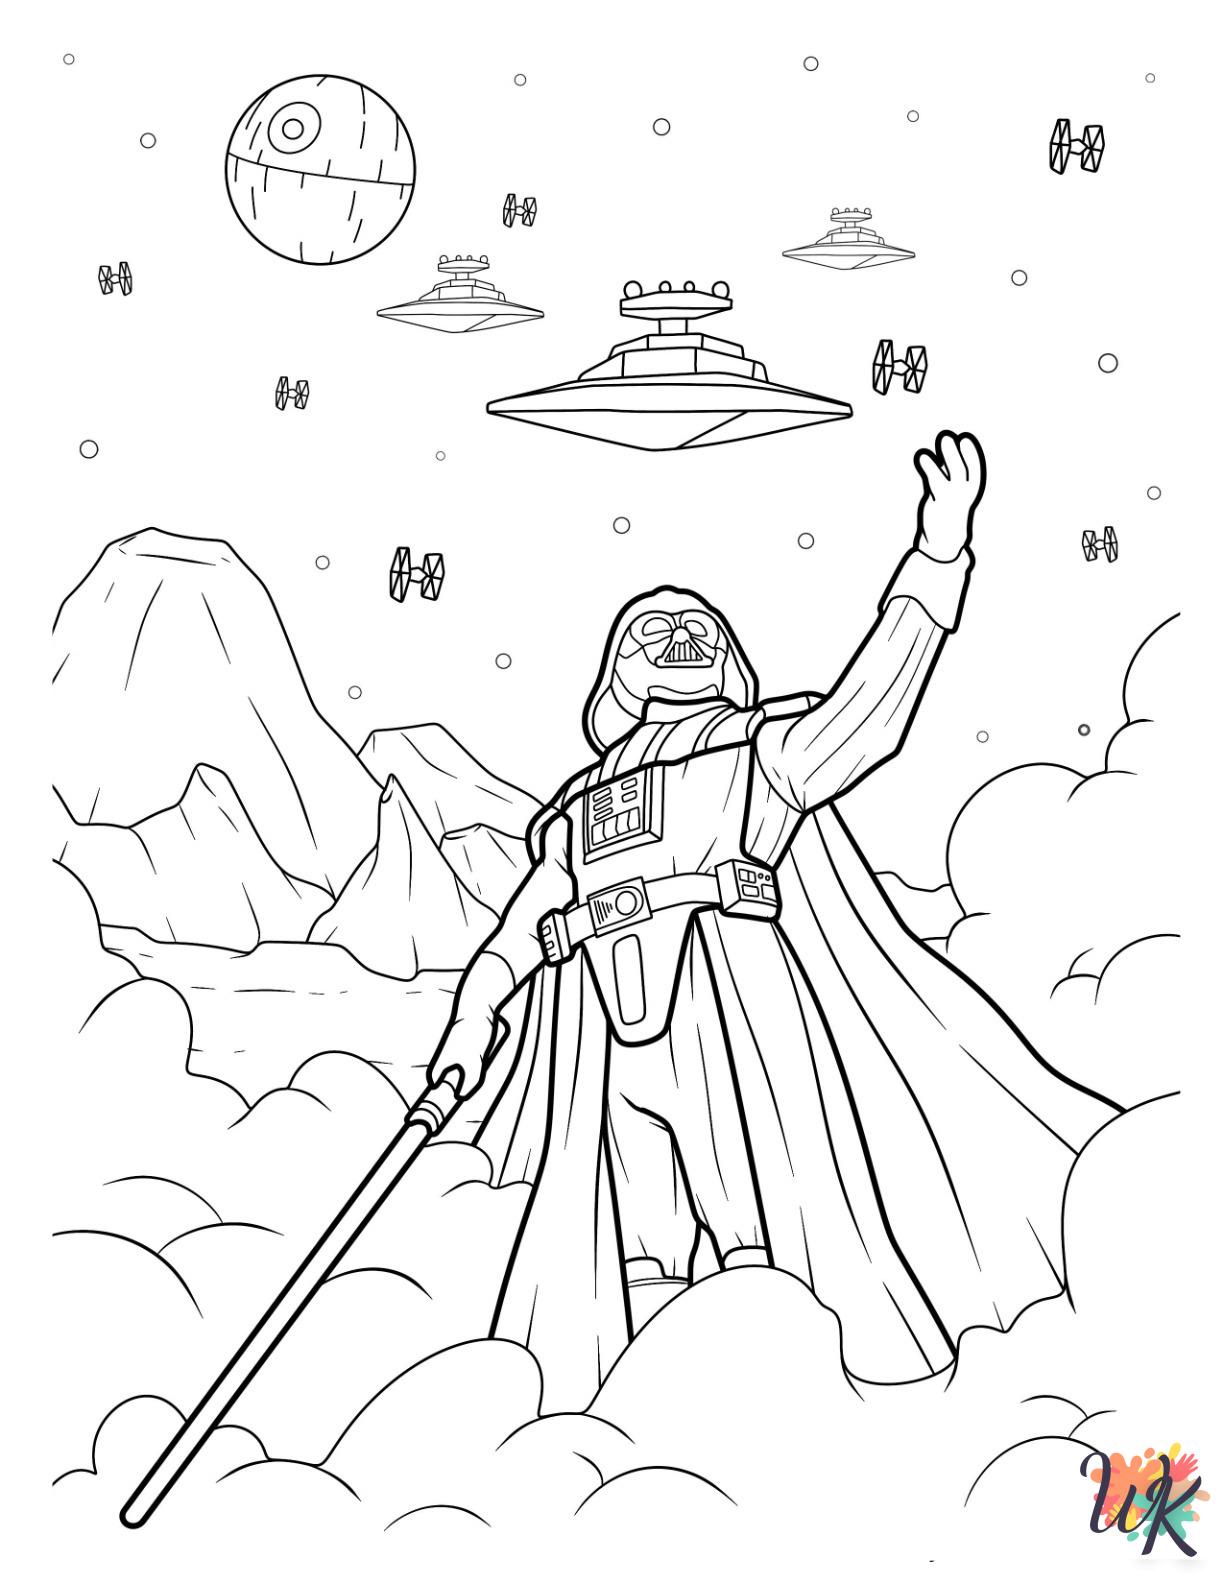 Darth Vader coloring pages easy